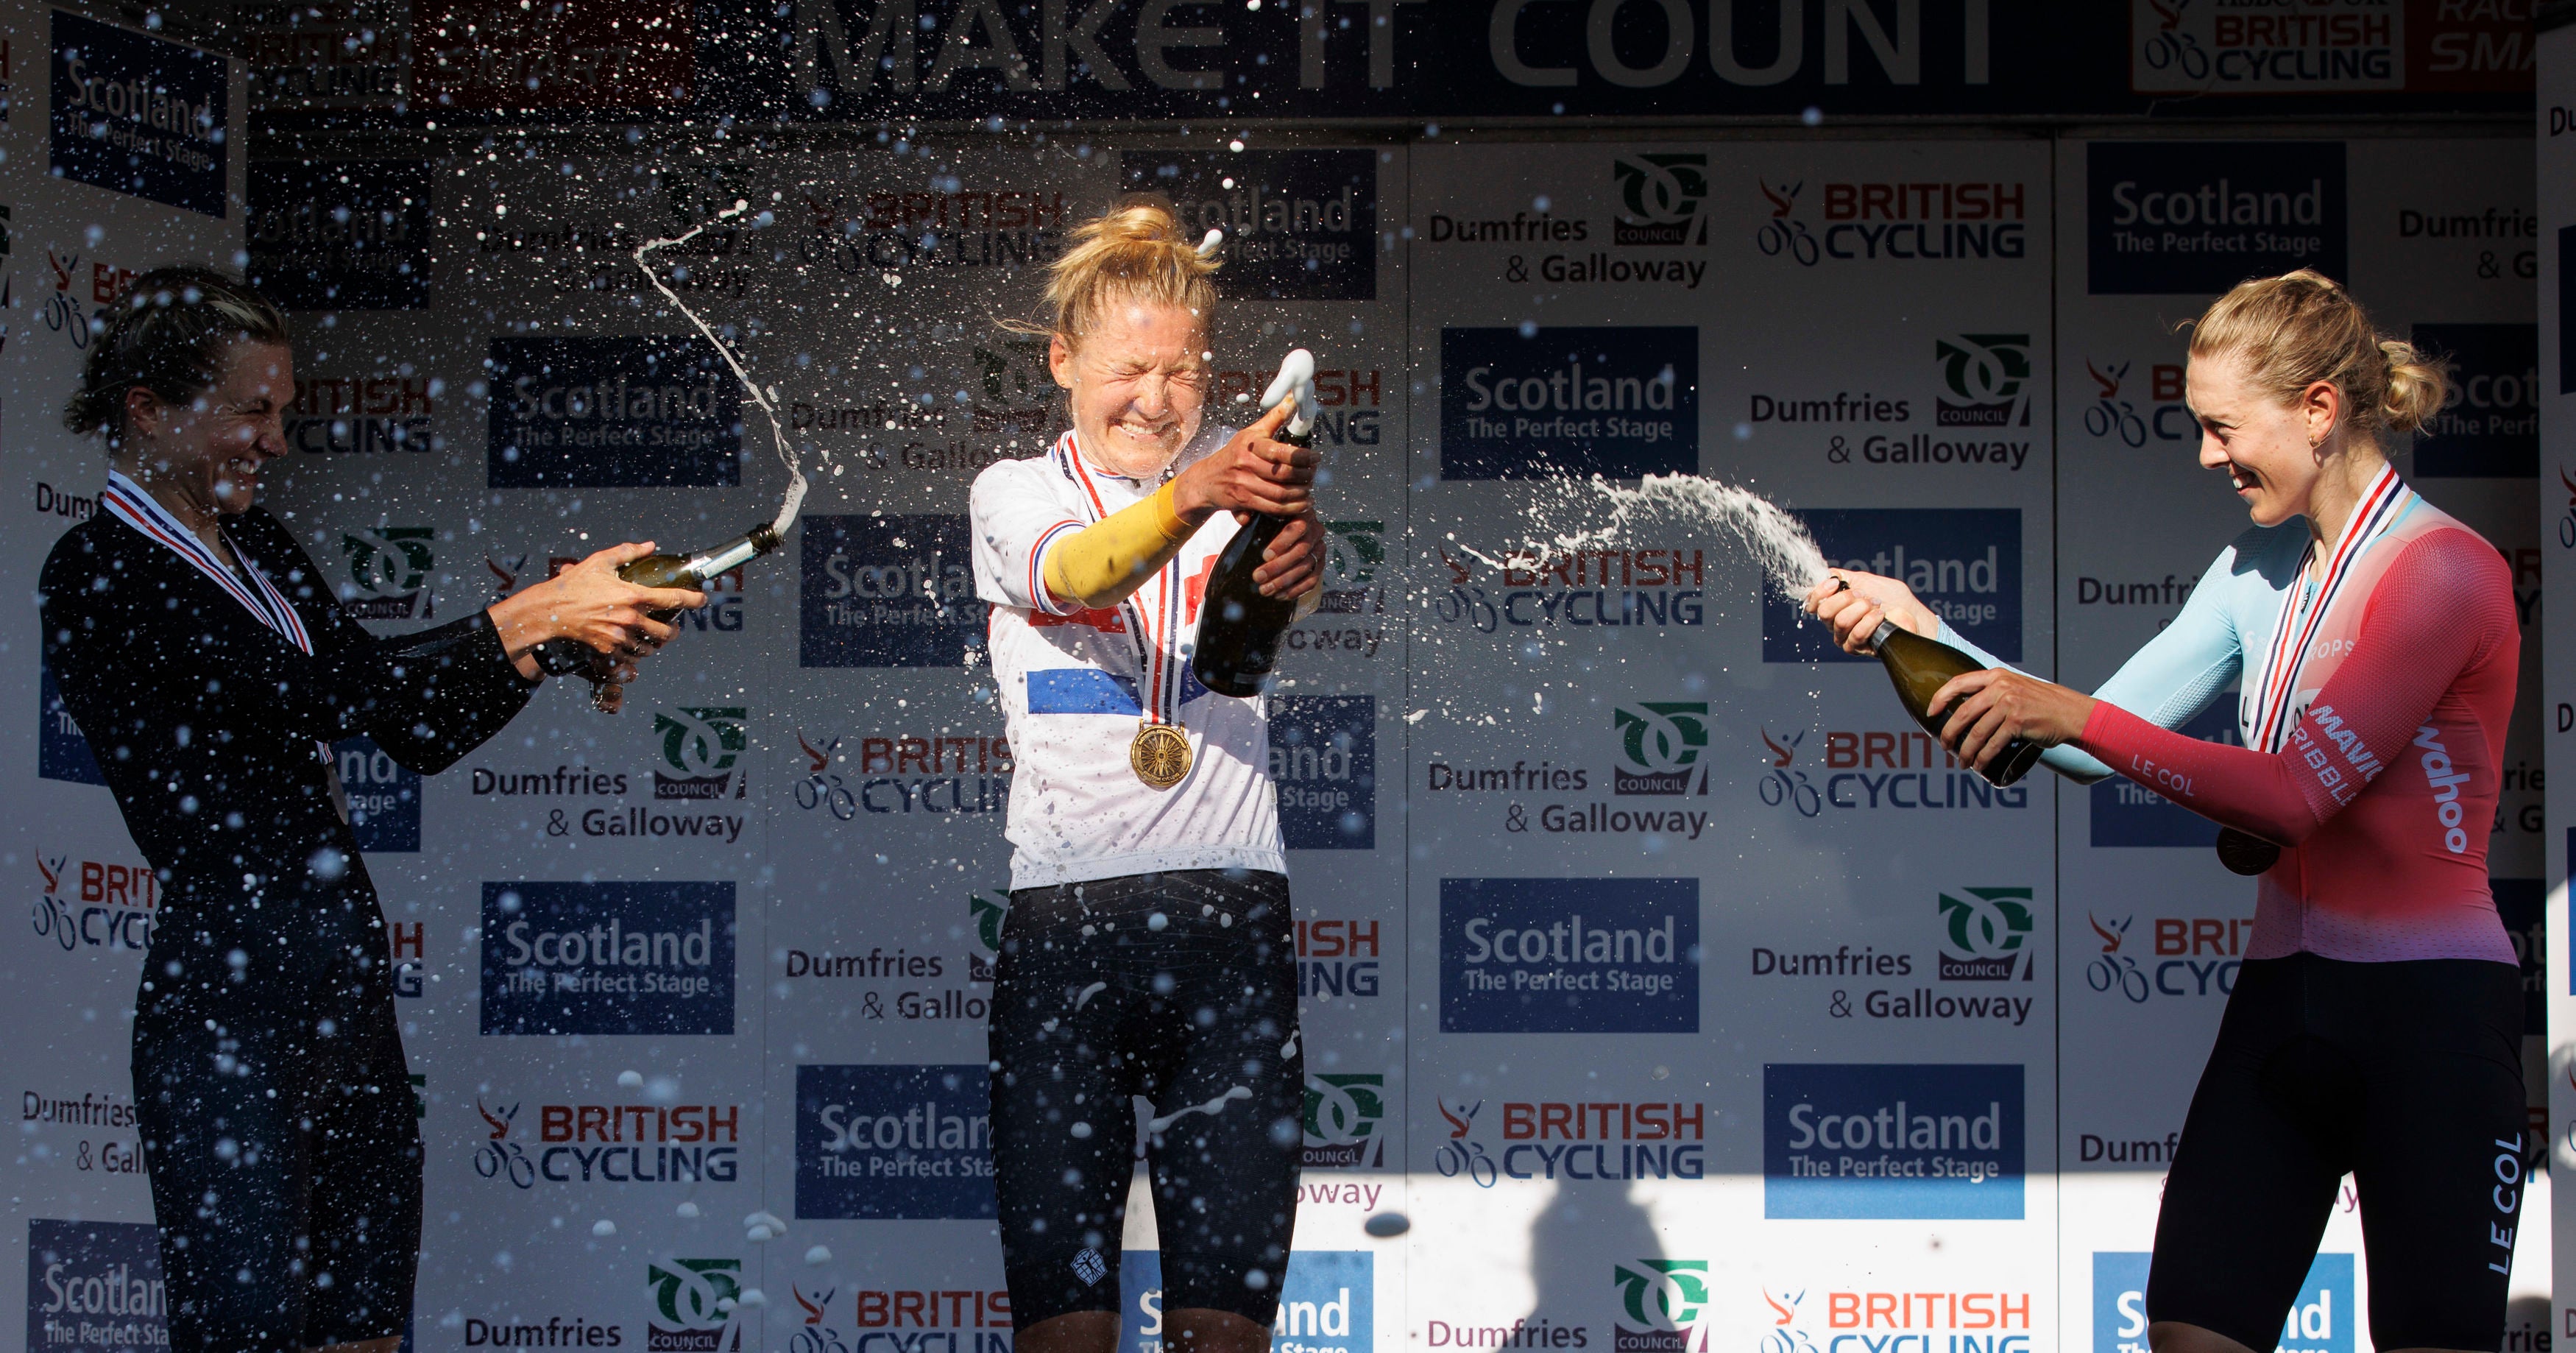 Lizzie Holden, right, finished third in the British Championships time trial